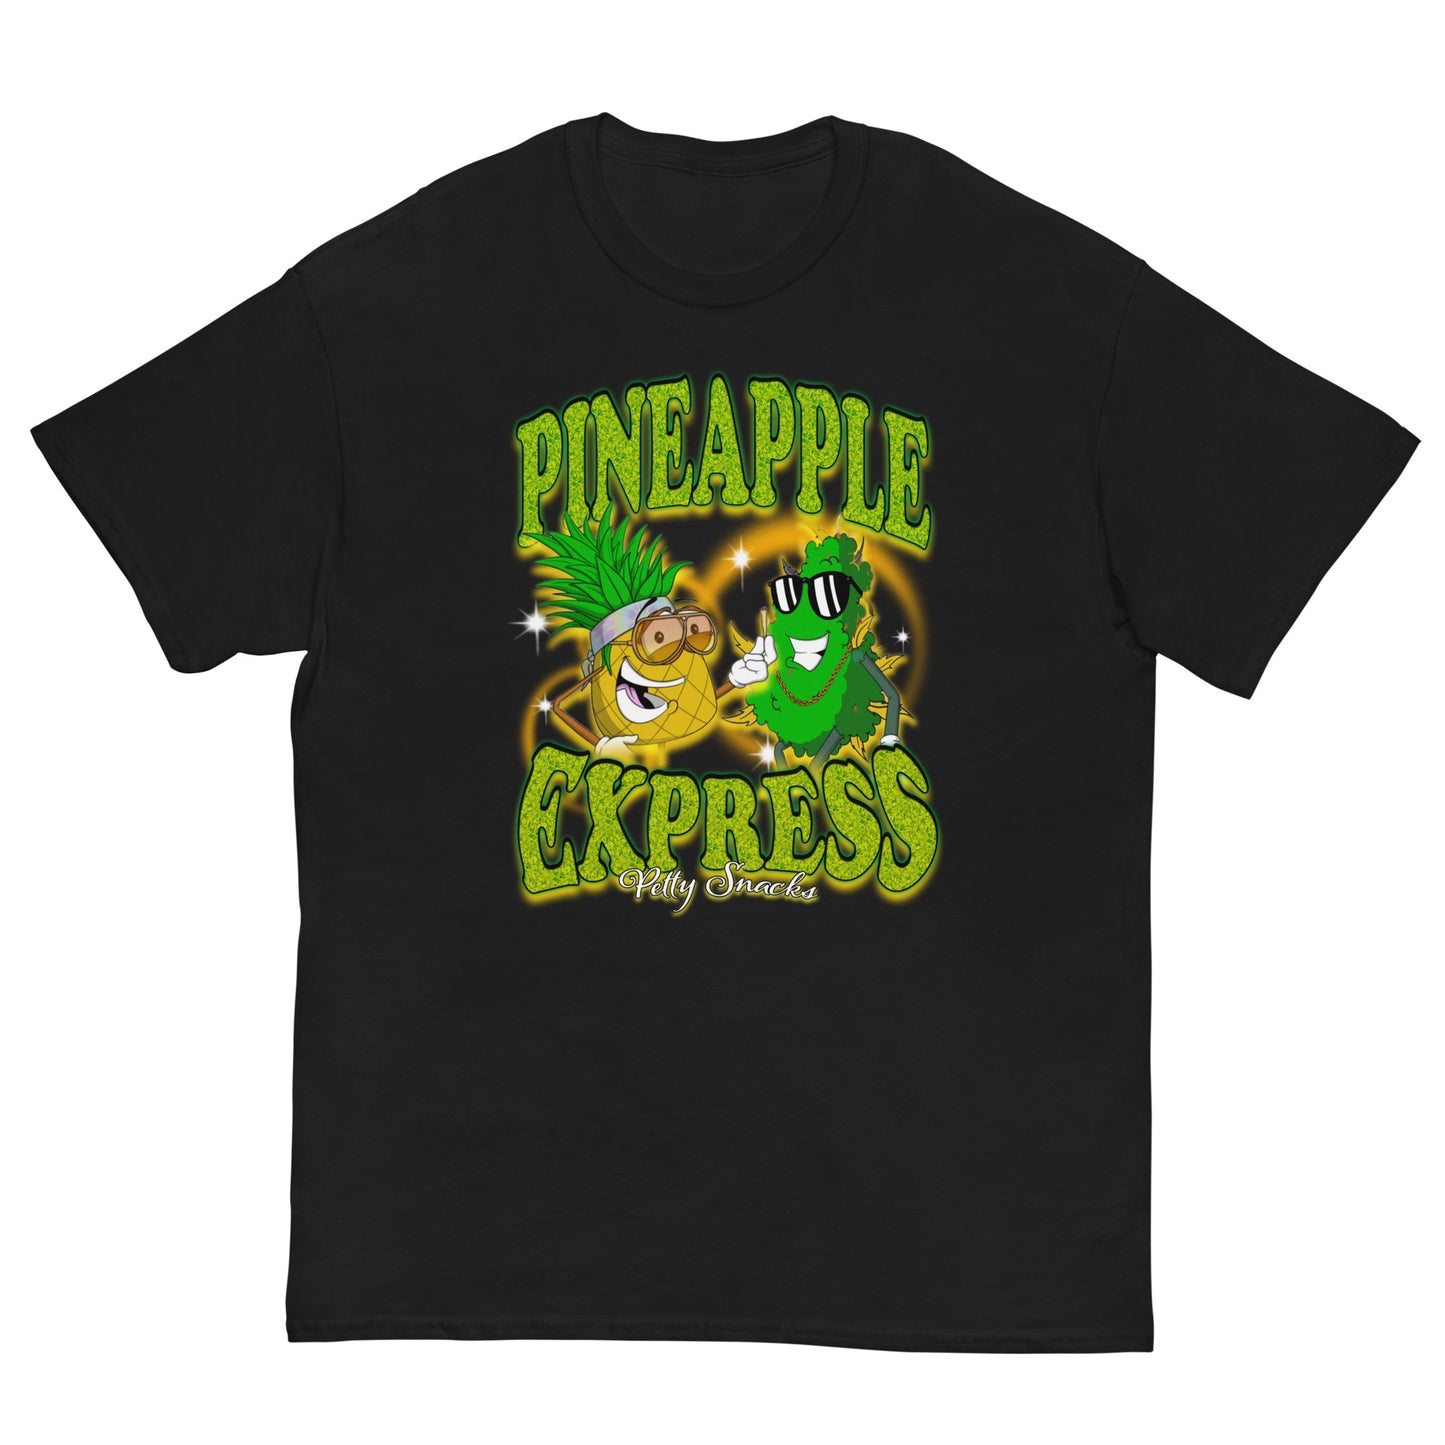 Black t-shirt. Front Graphic: Big Lettering top and bottom that reads "Pineapple Express" in green lettering with orange glow. In the center, there is a cartoon pineapple character smiling holding a joint, and a smiling weed nug character with shades. "Petty Snacks" in small, white cursive on bottom of graphic.